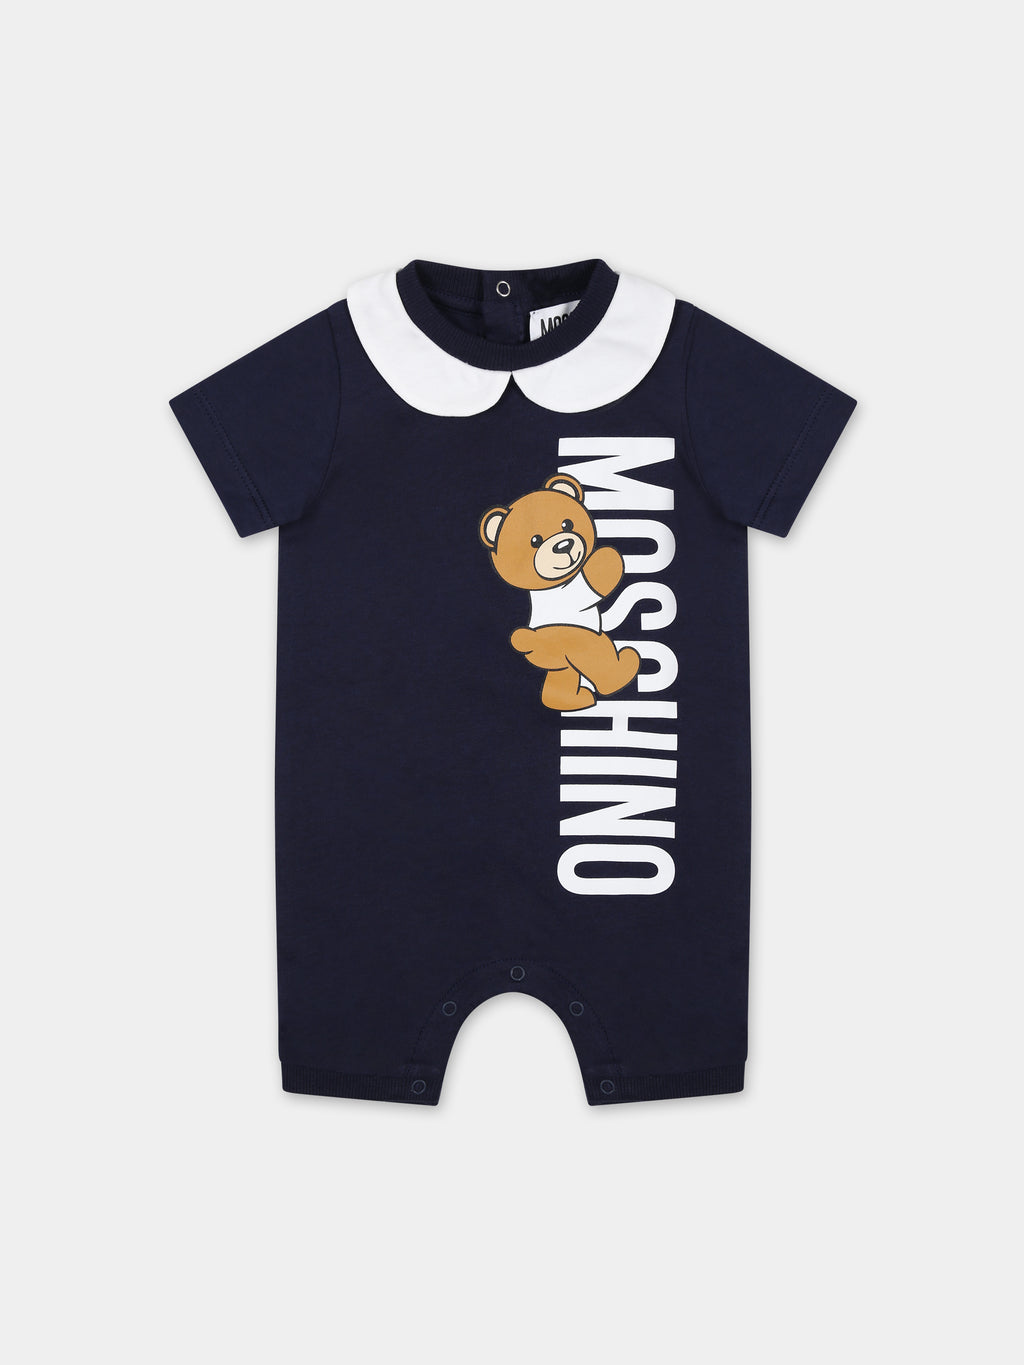 Blue baby romper with Teddy Bear and logo